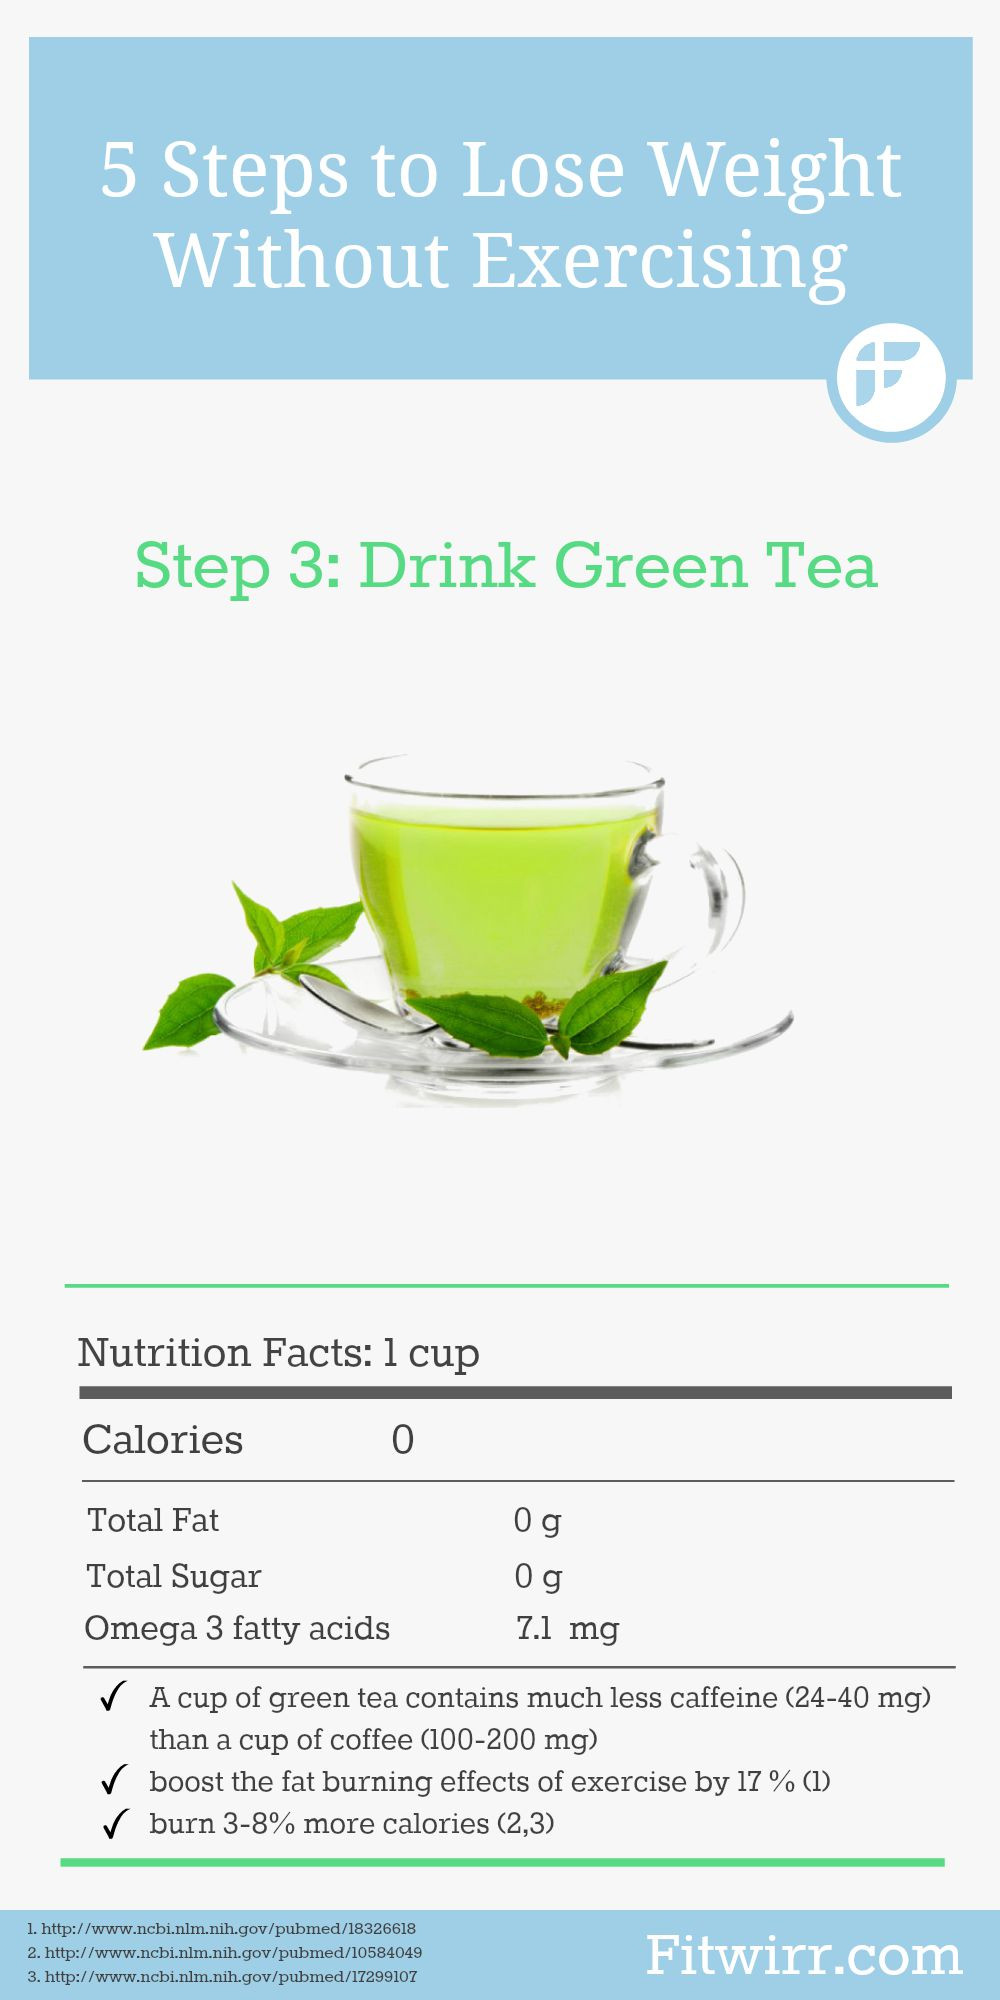 Green Tea Weight Loss Drink
 5 Surprising Ways to Lose Weight Without a Single Bit of